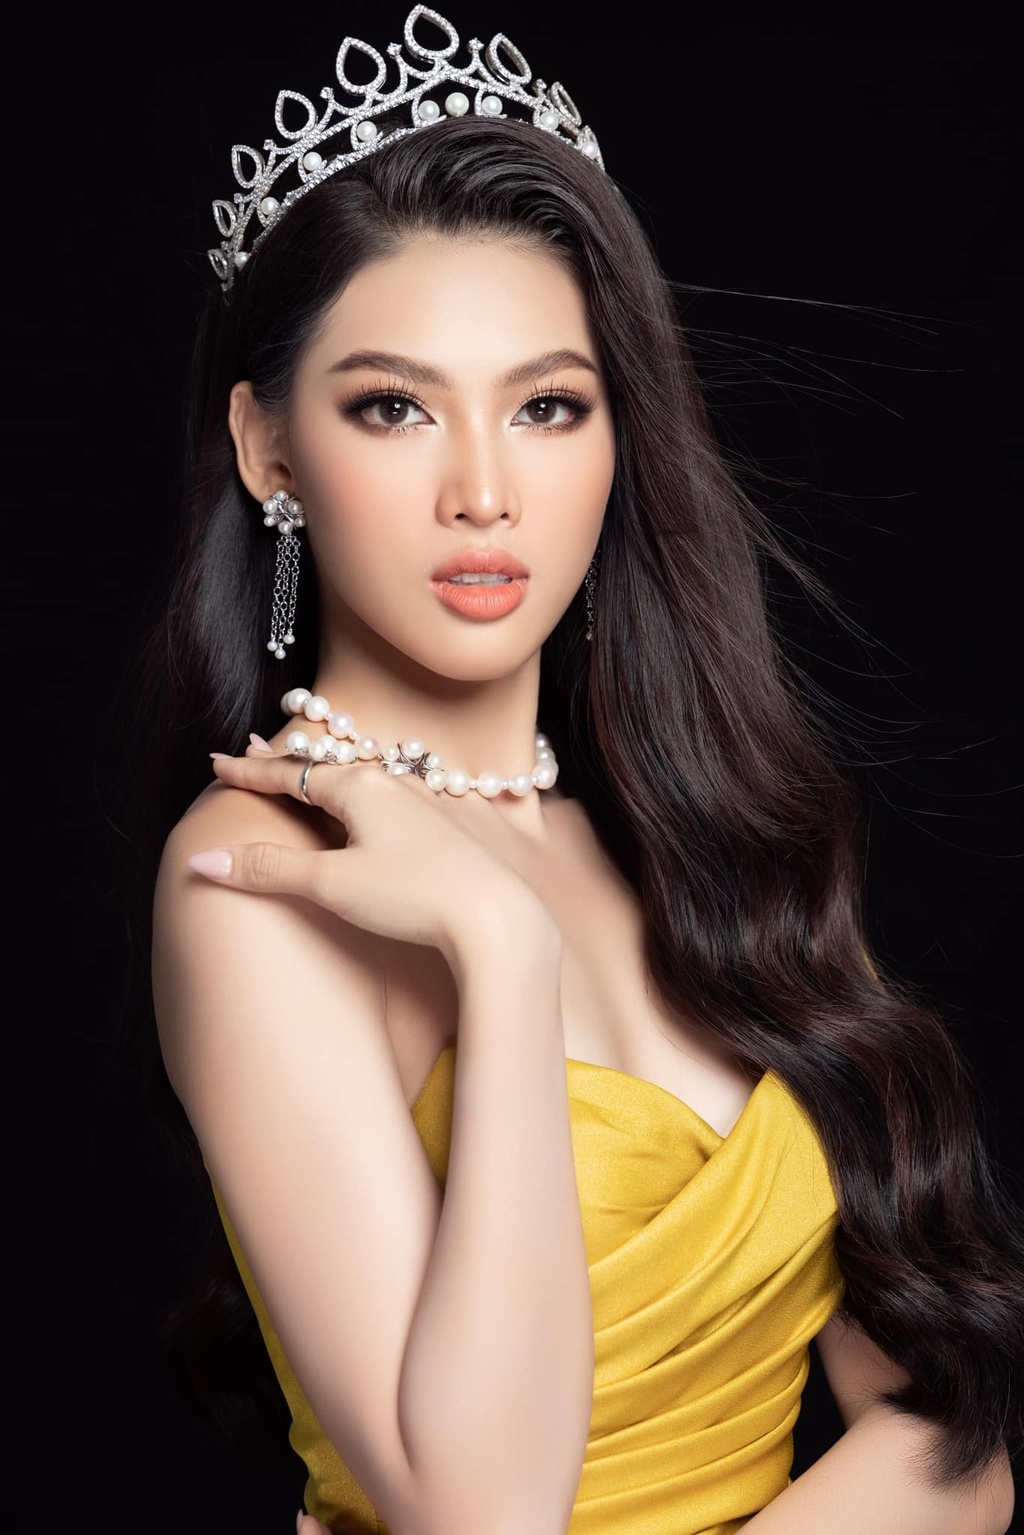 ngoc thao faces strong contenders at miss grand international 2020 picture 1